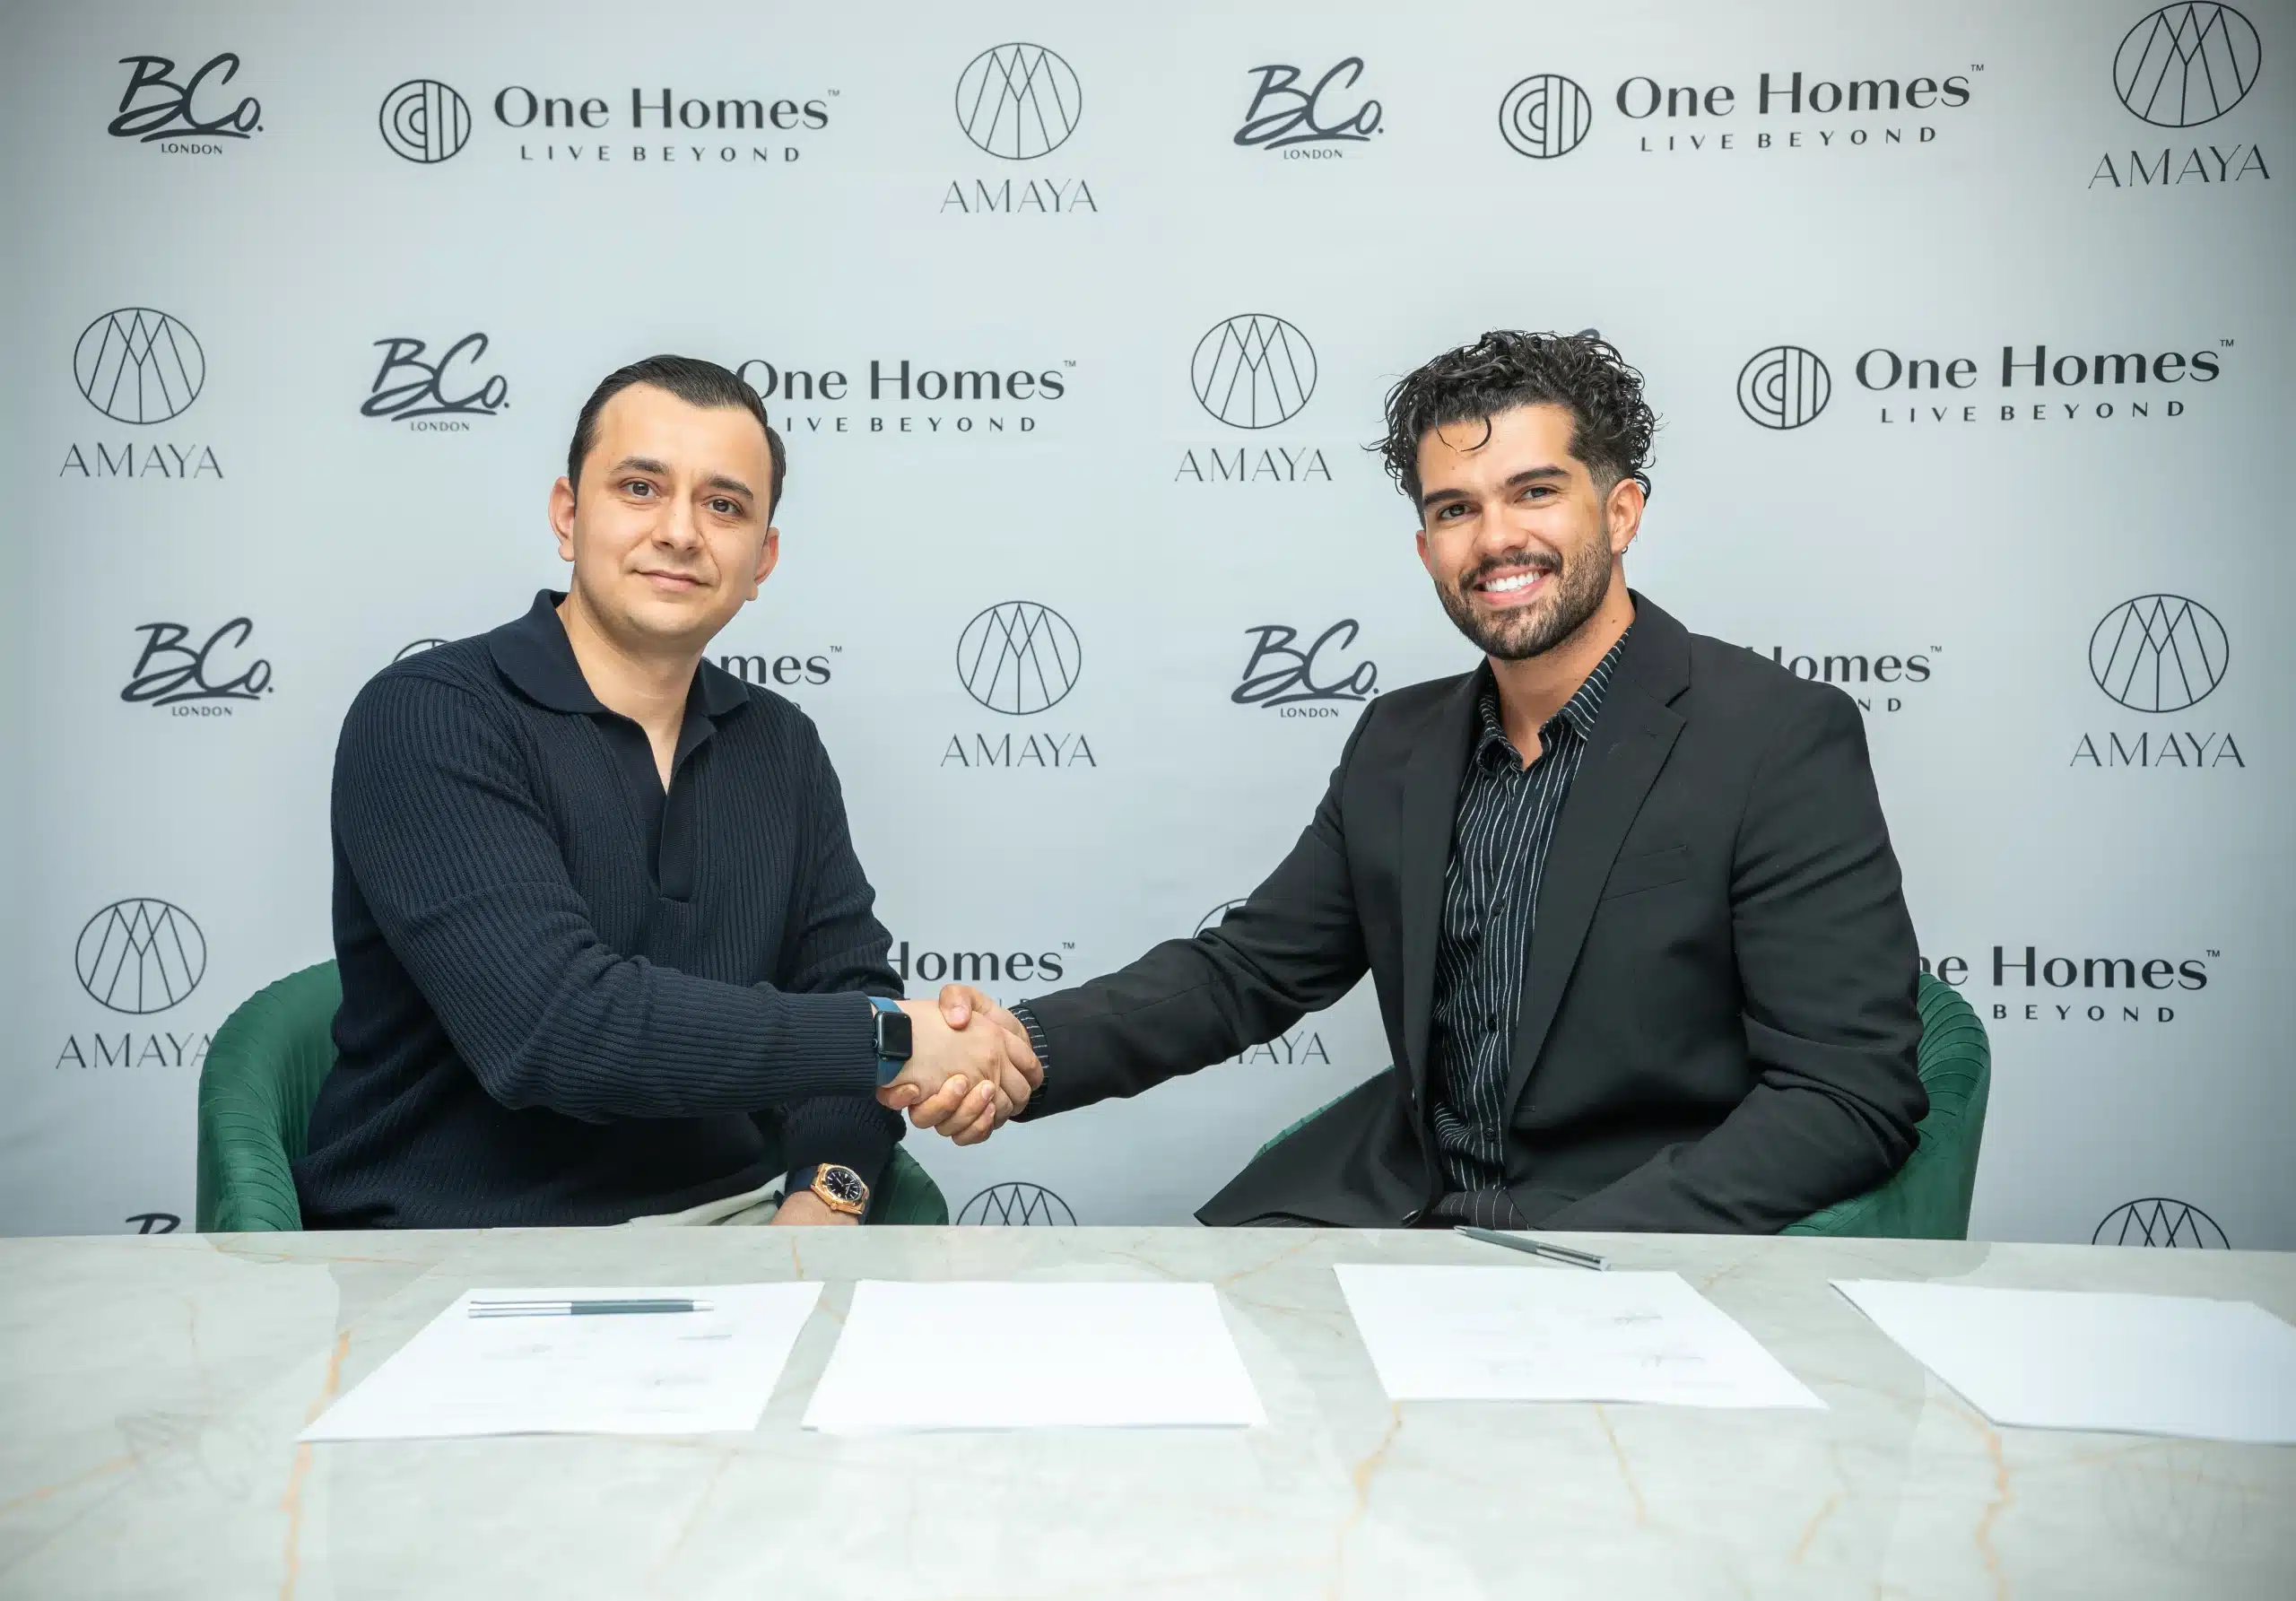 One Homes Signs World Famous "BCo." to Partner for their New $35M Branded Residences Project in Islamabad